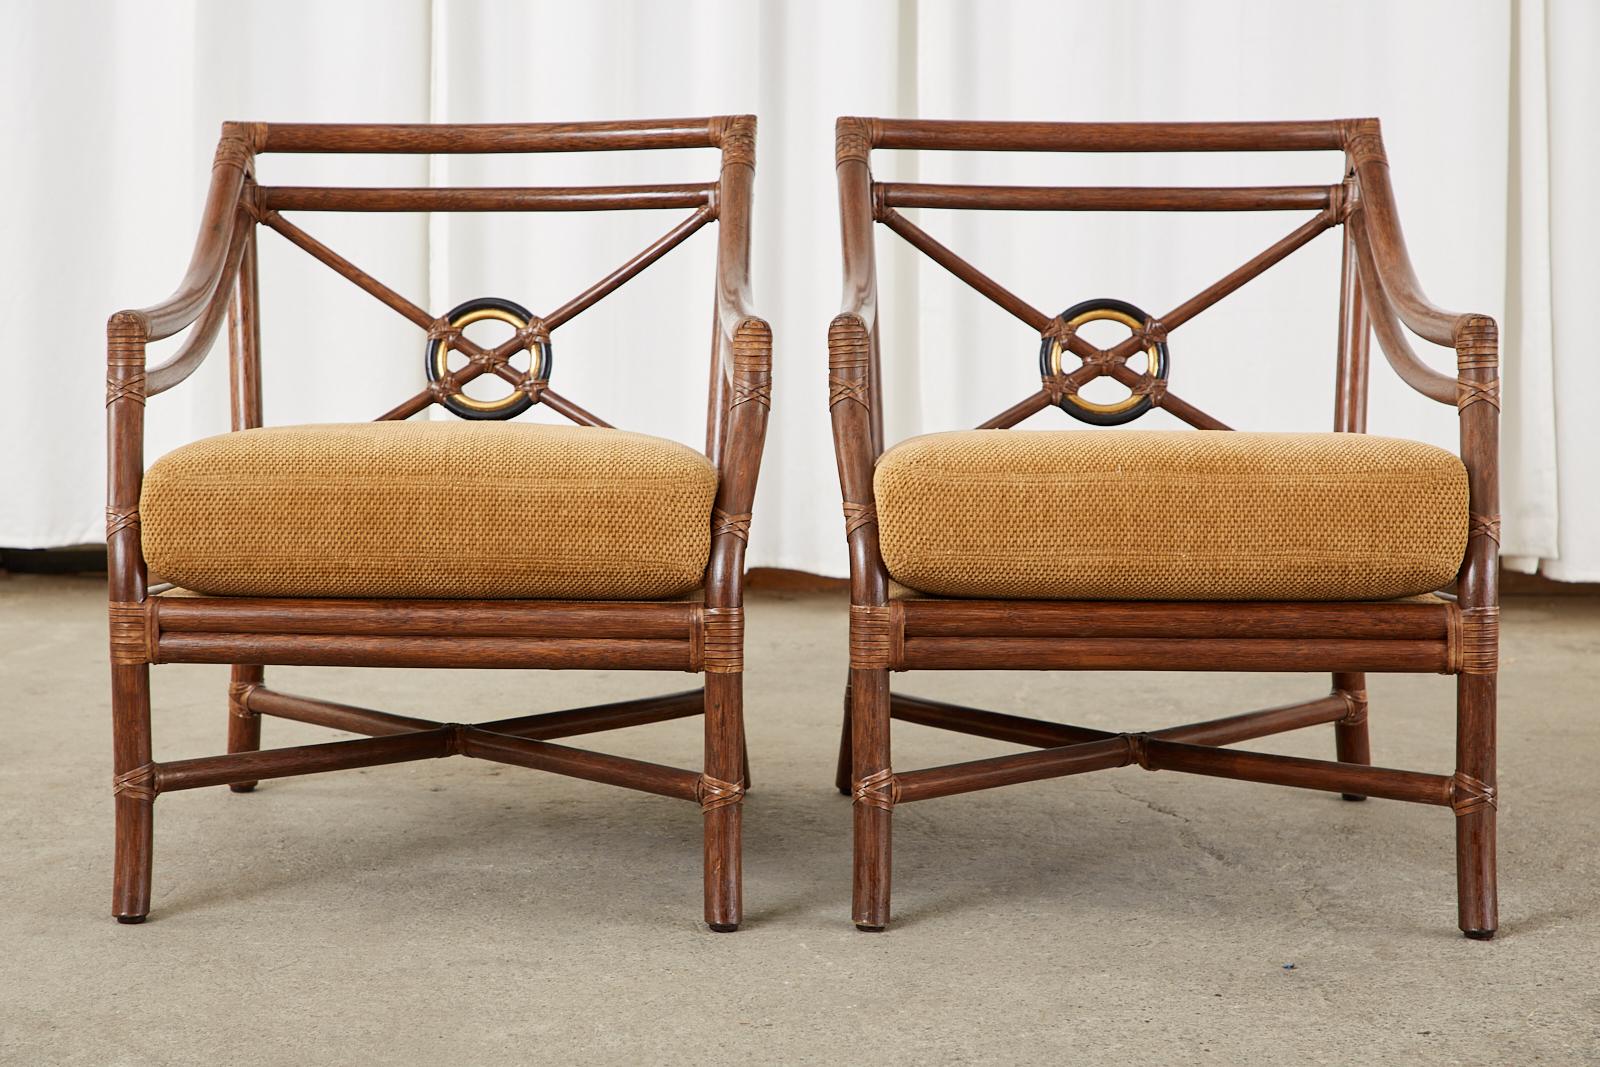 Stylish pair of McGuire lounge armchairs featuring their iconic target design back splat. Bespoke pair of chairs designed by Elinor McGuire in the California organic modern style from rattan poles lashed together with leather rawhide laces. The